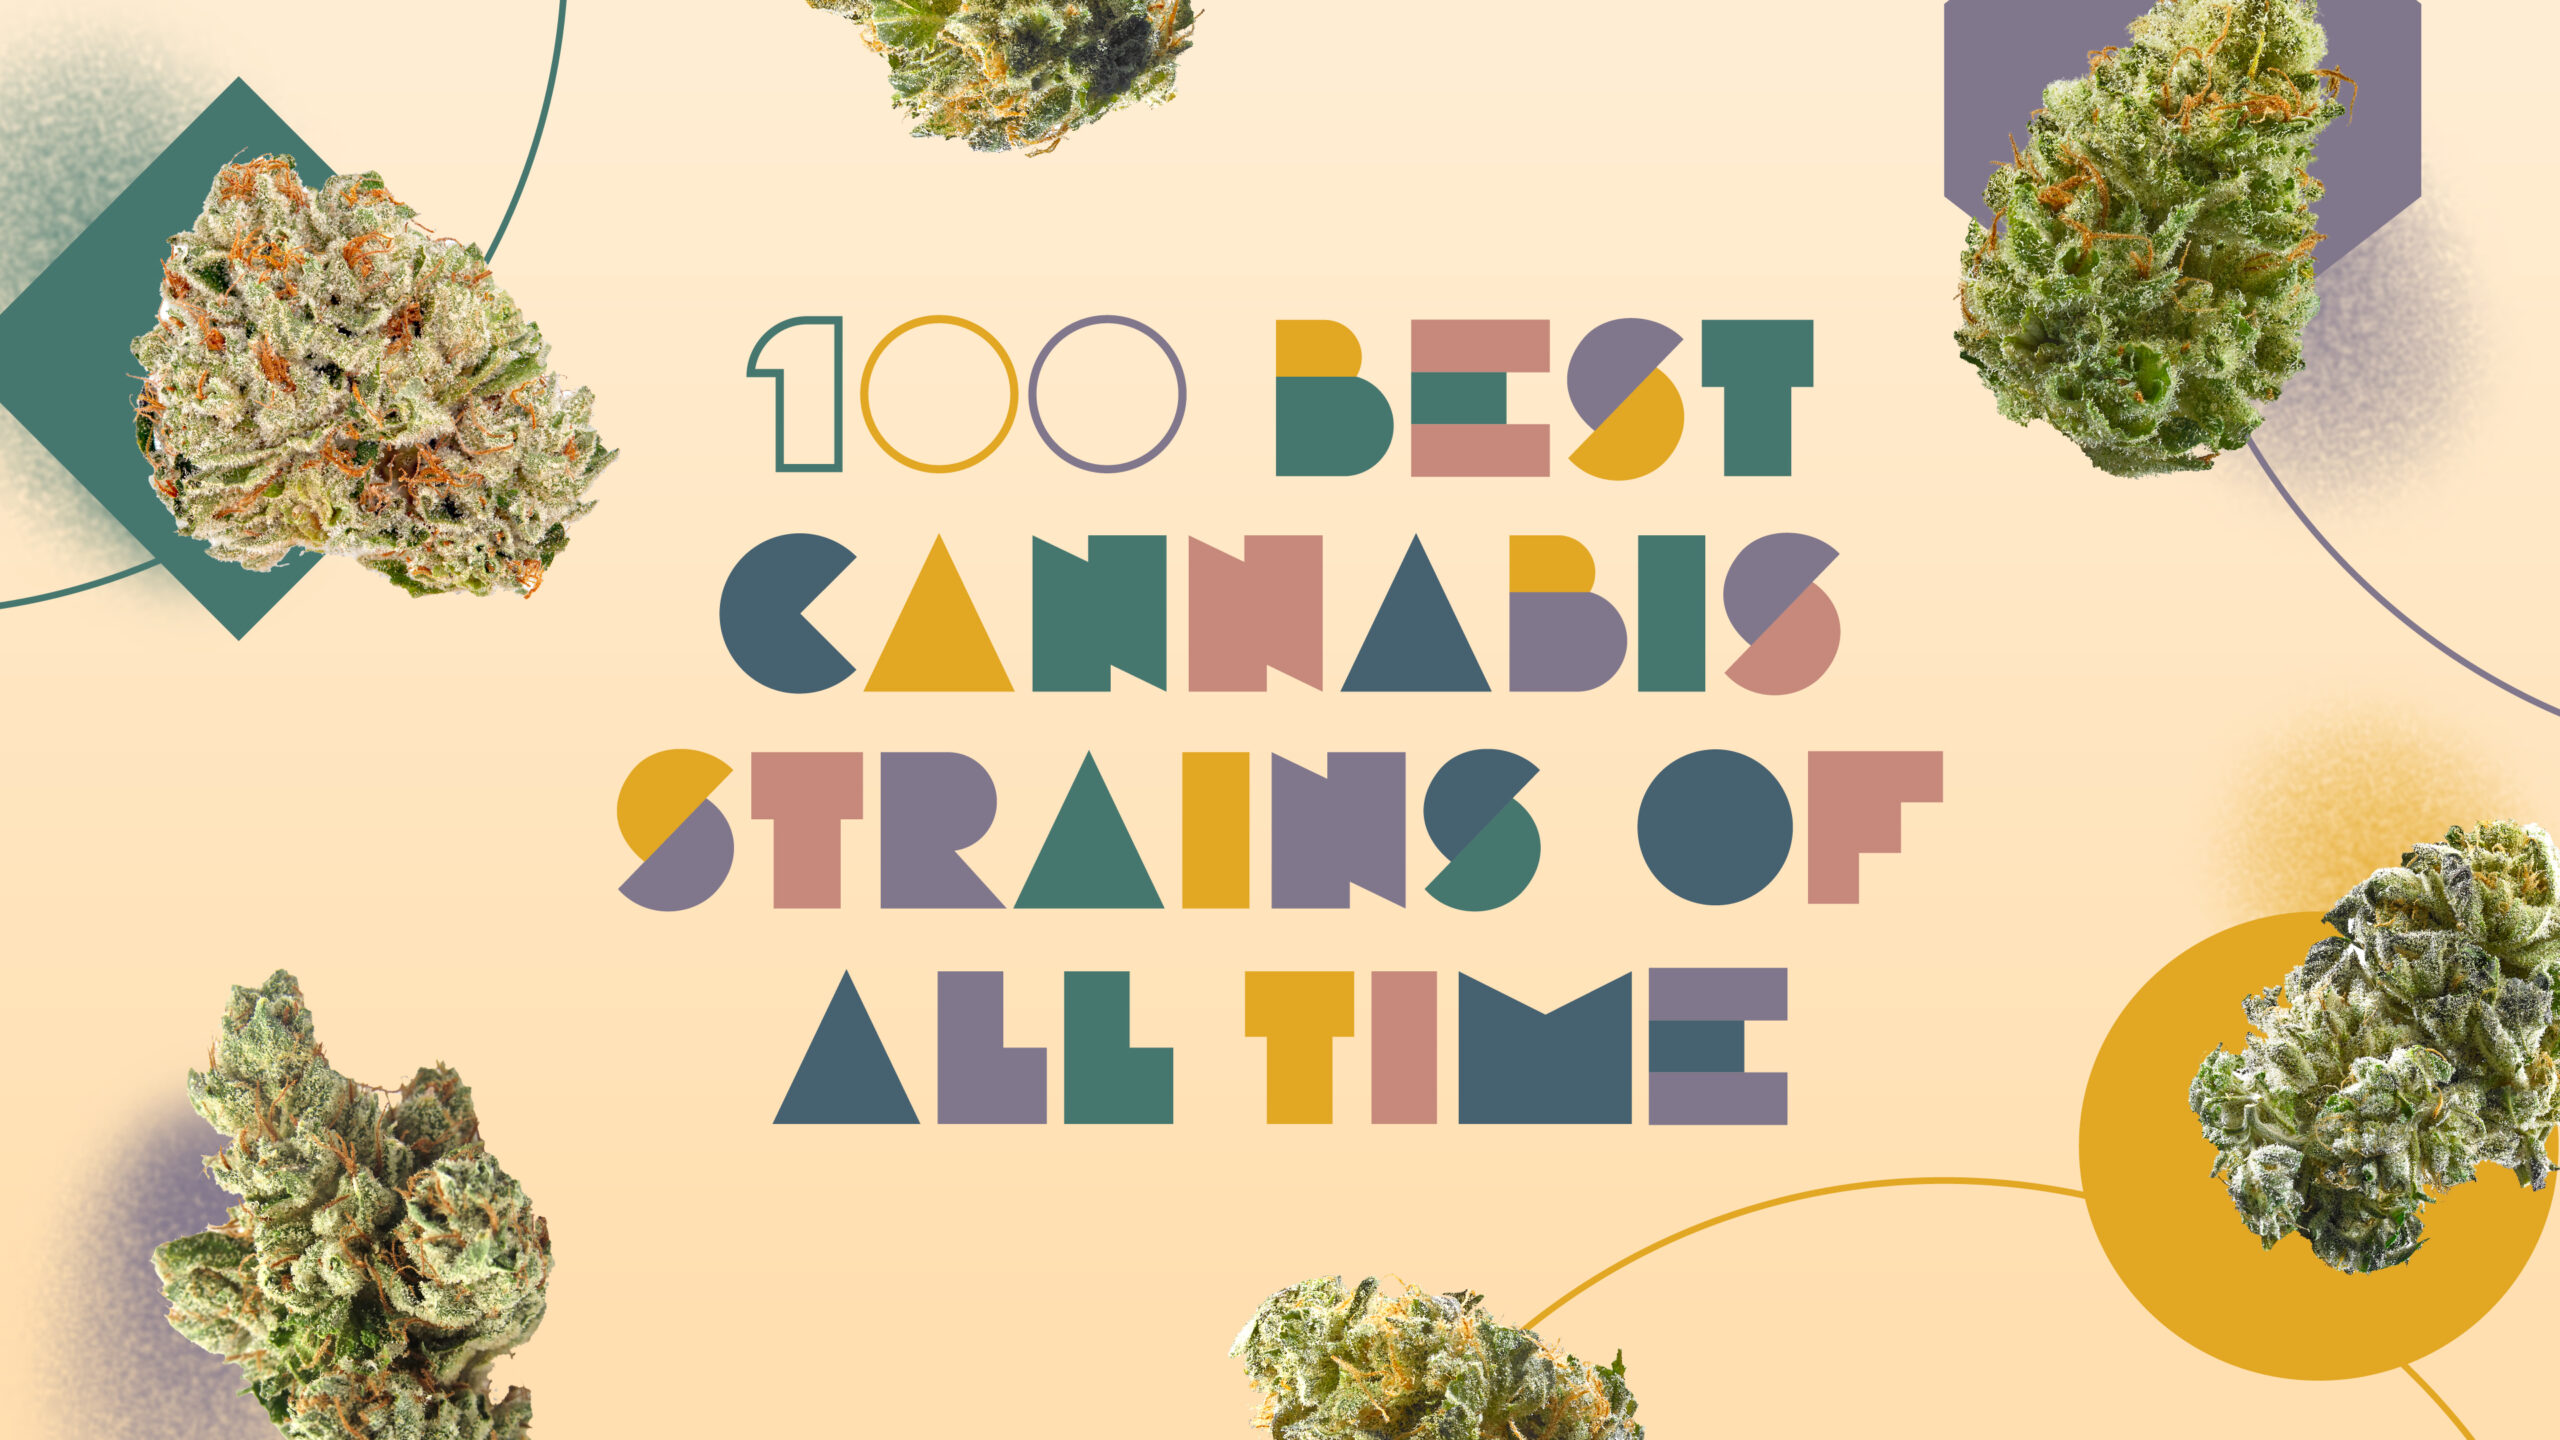 The best strains of all time 100 top cannabis strains to try